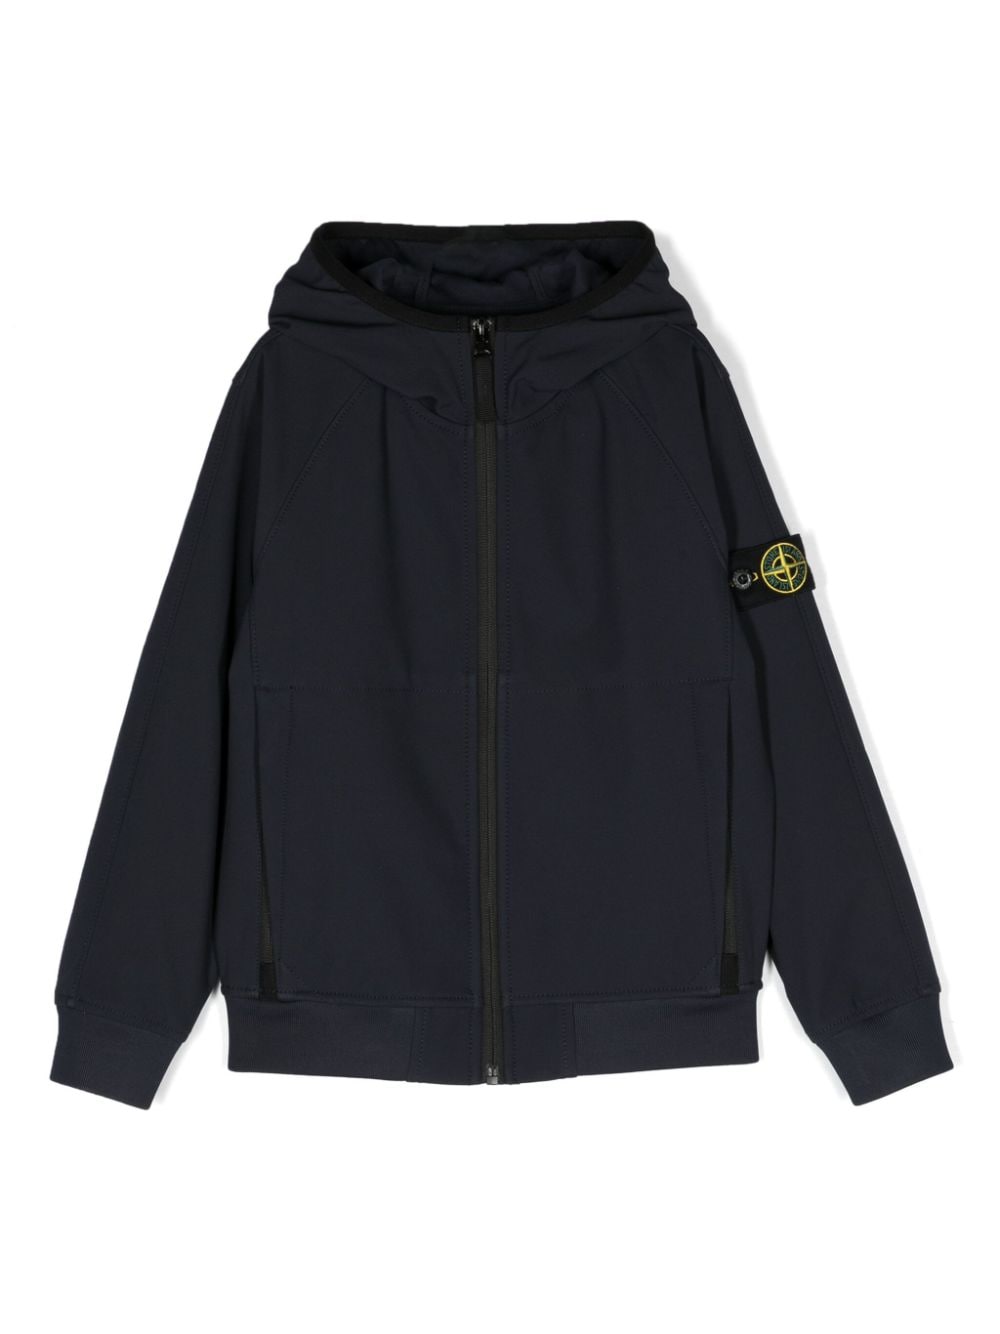 Zipped hooded jacket<BR/><BR/><BR/>